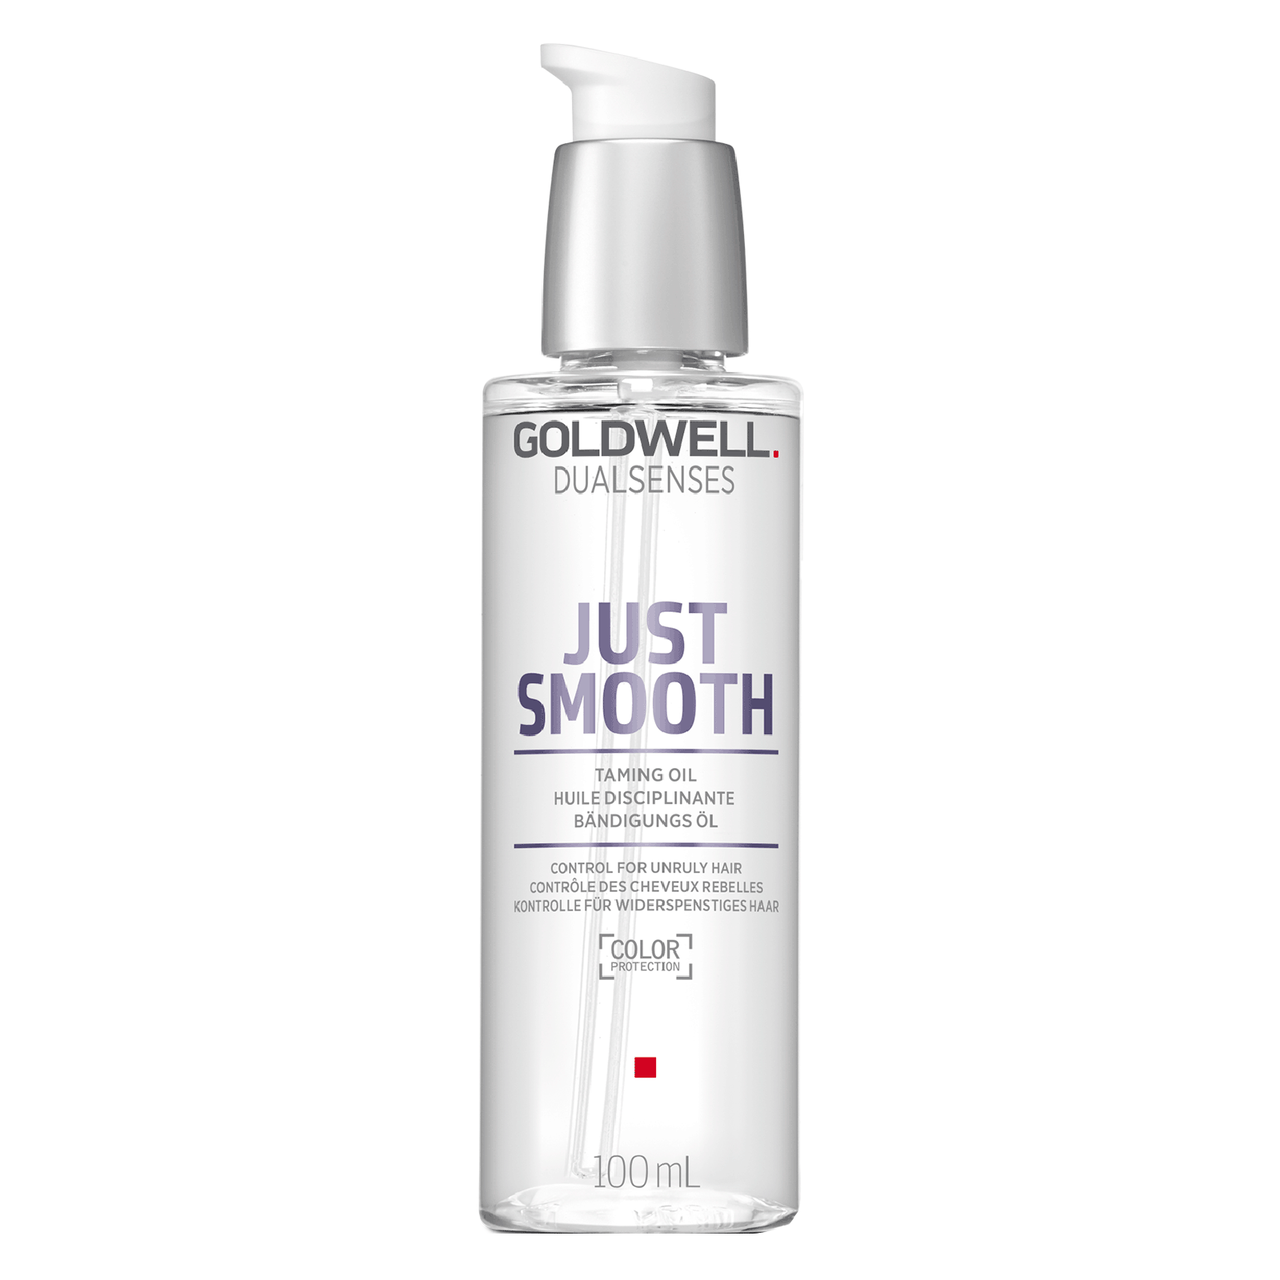 Goldwell Dualsenses Just Smooth Taming Oil 3.3oz/ 100ml - $32.00